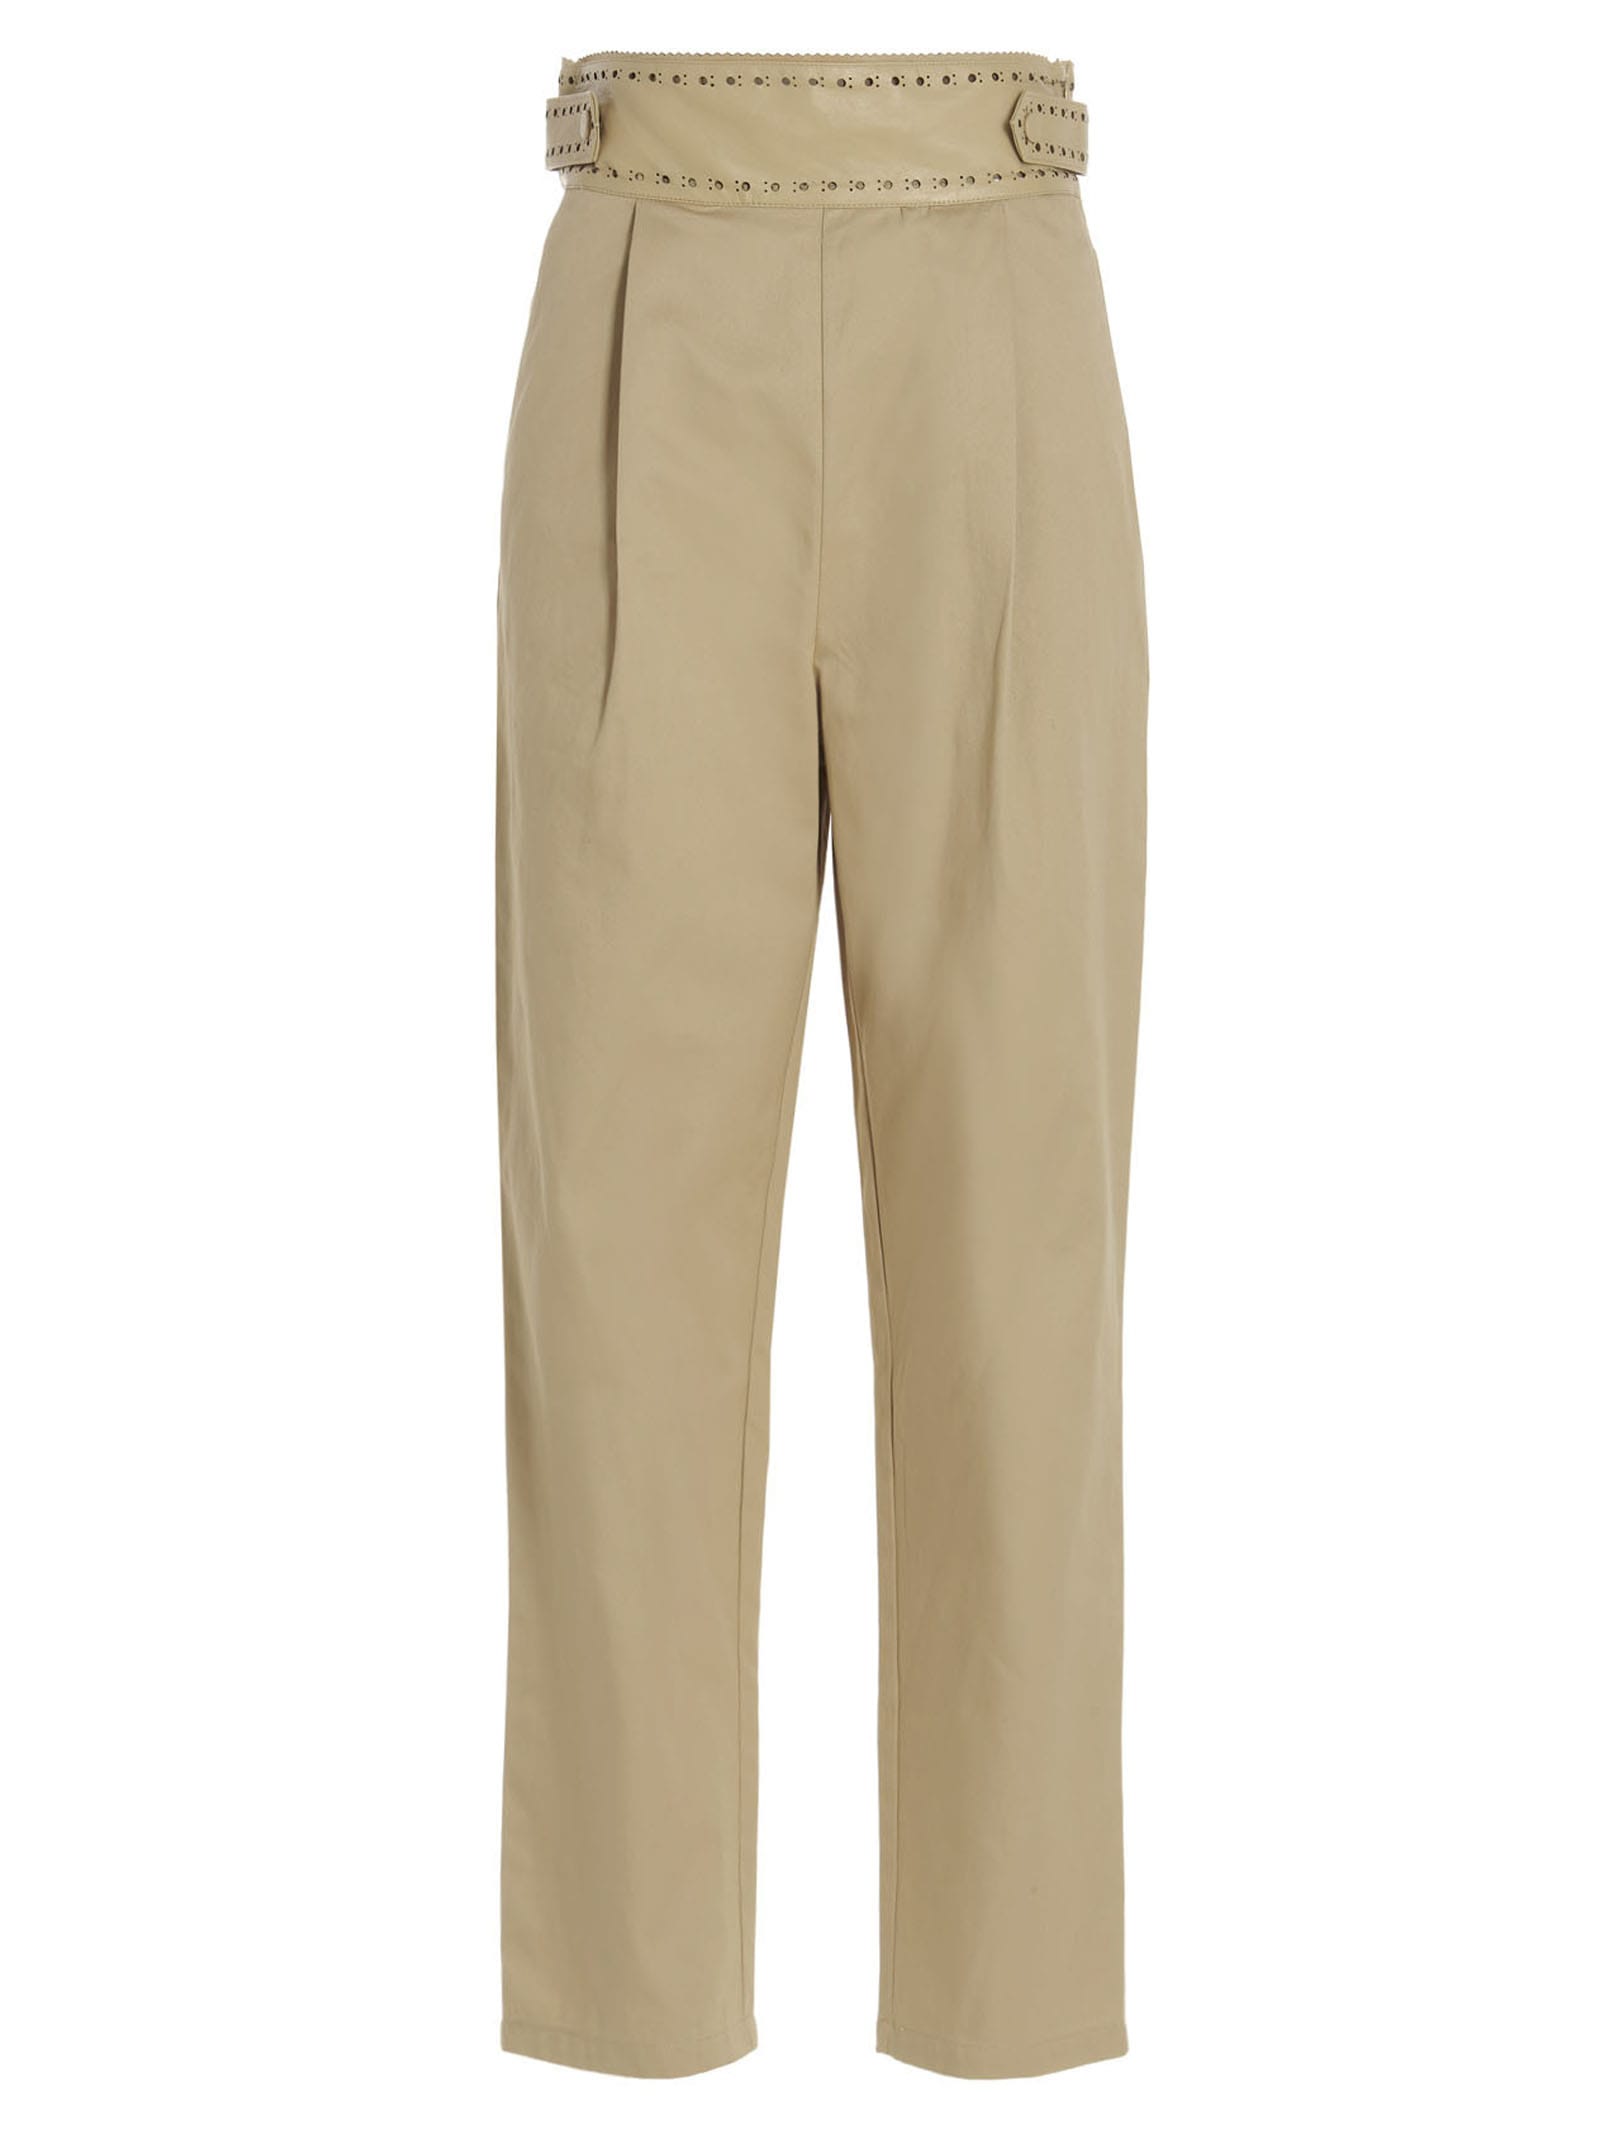 TwinSet Cotton Trousers